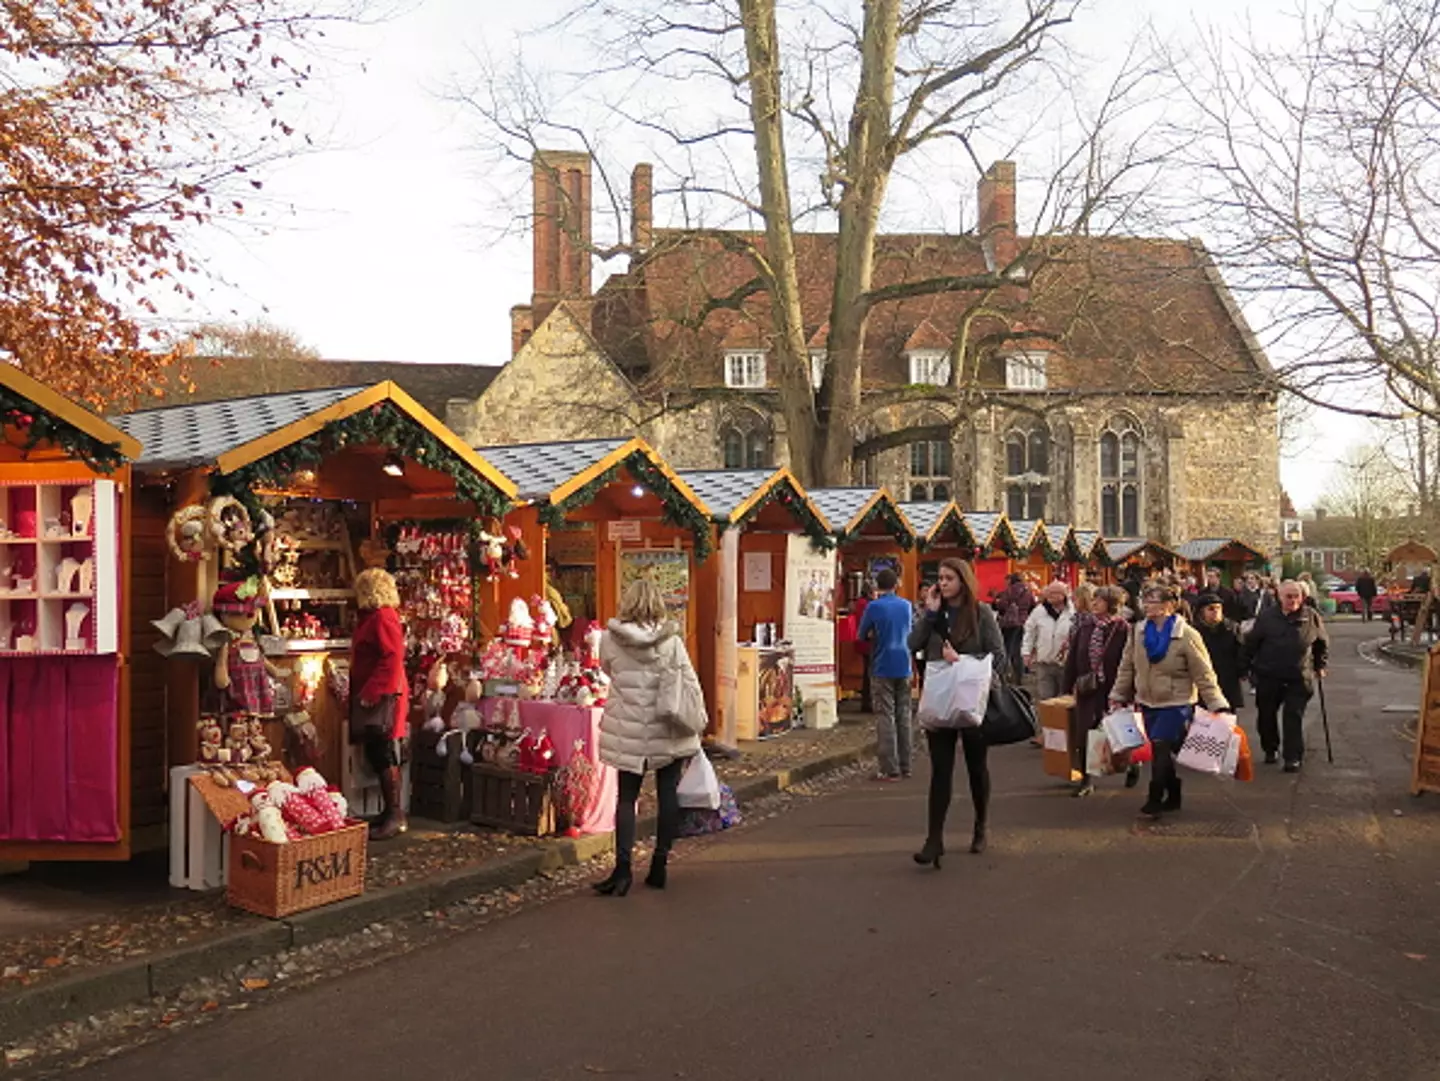 Have a browse at over 100 wooden chalets at the Winchester Cathedral Christmas Market.